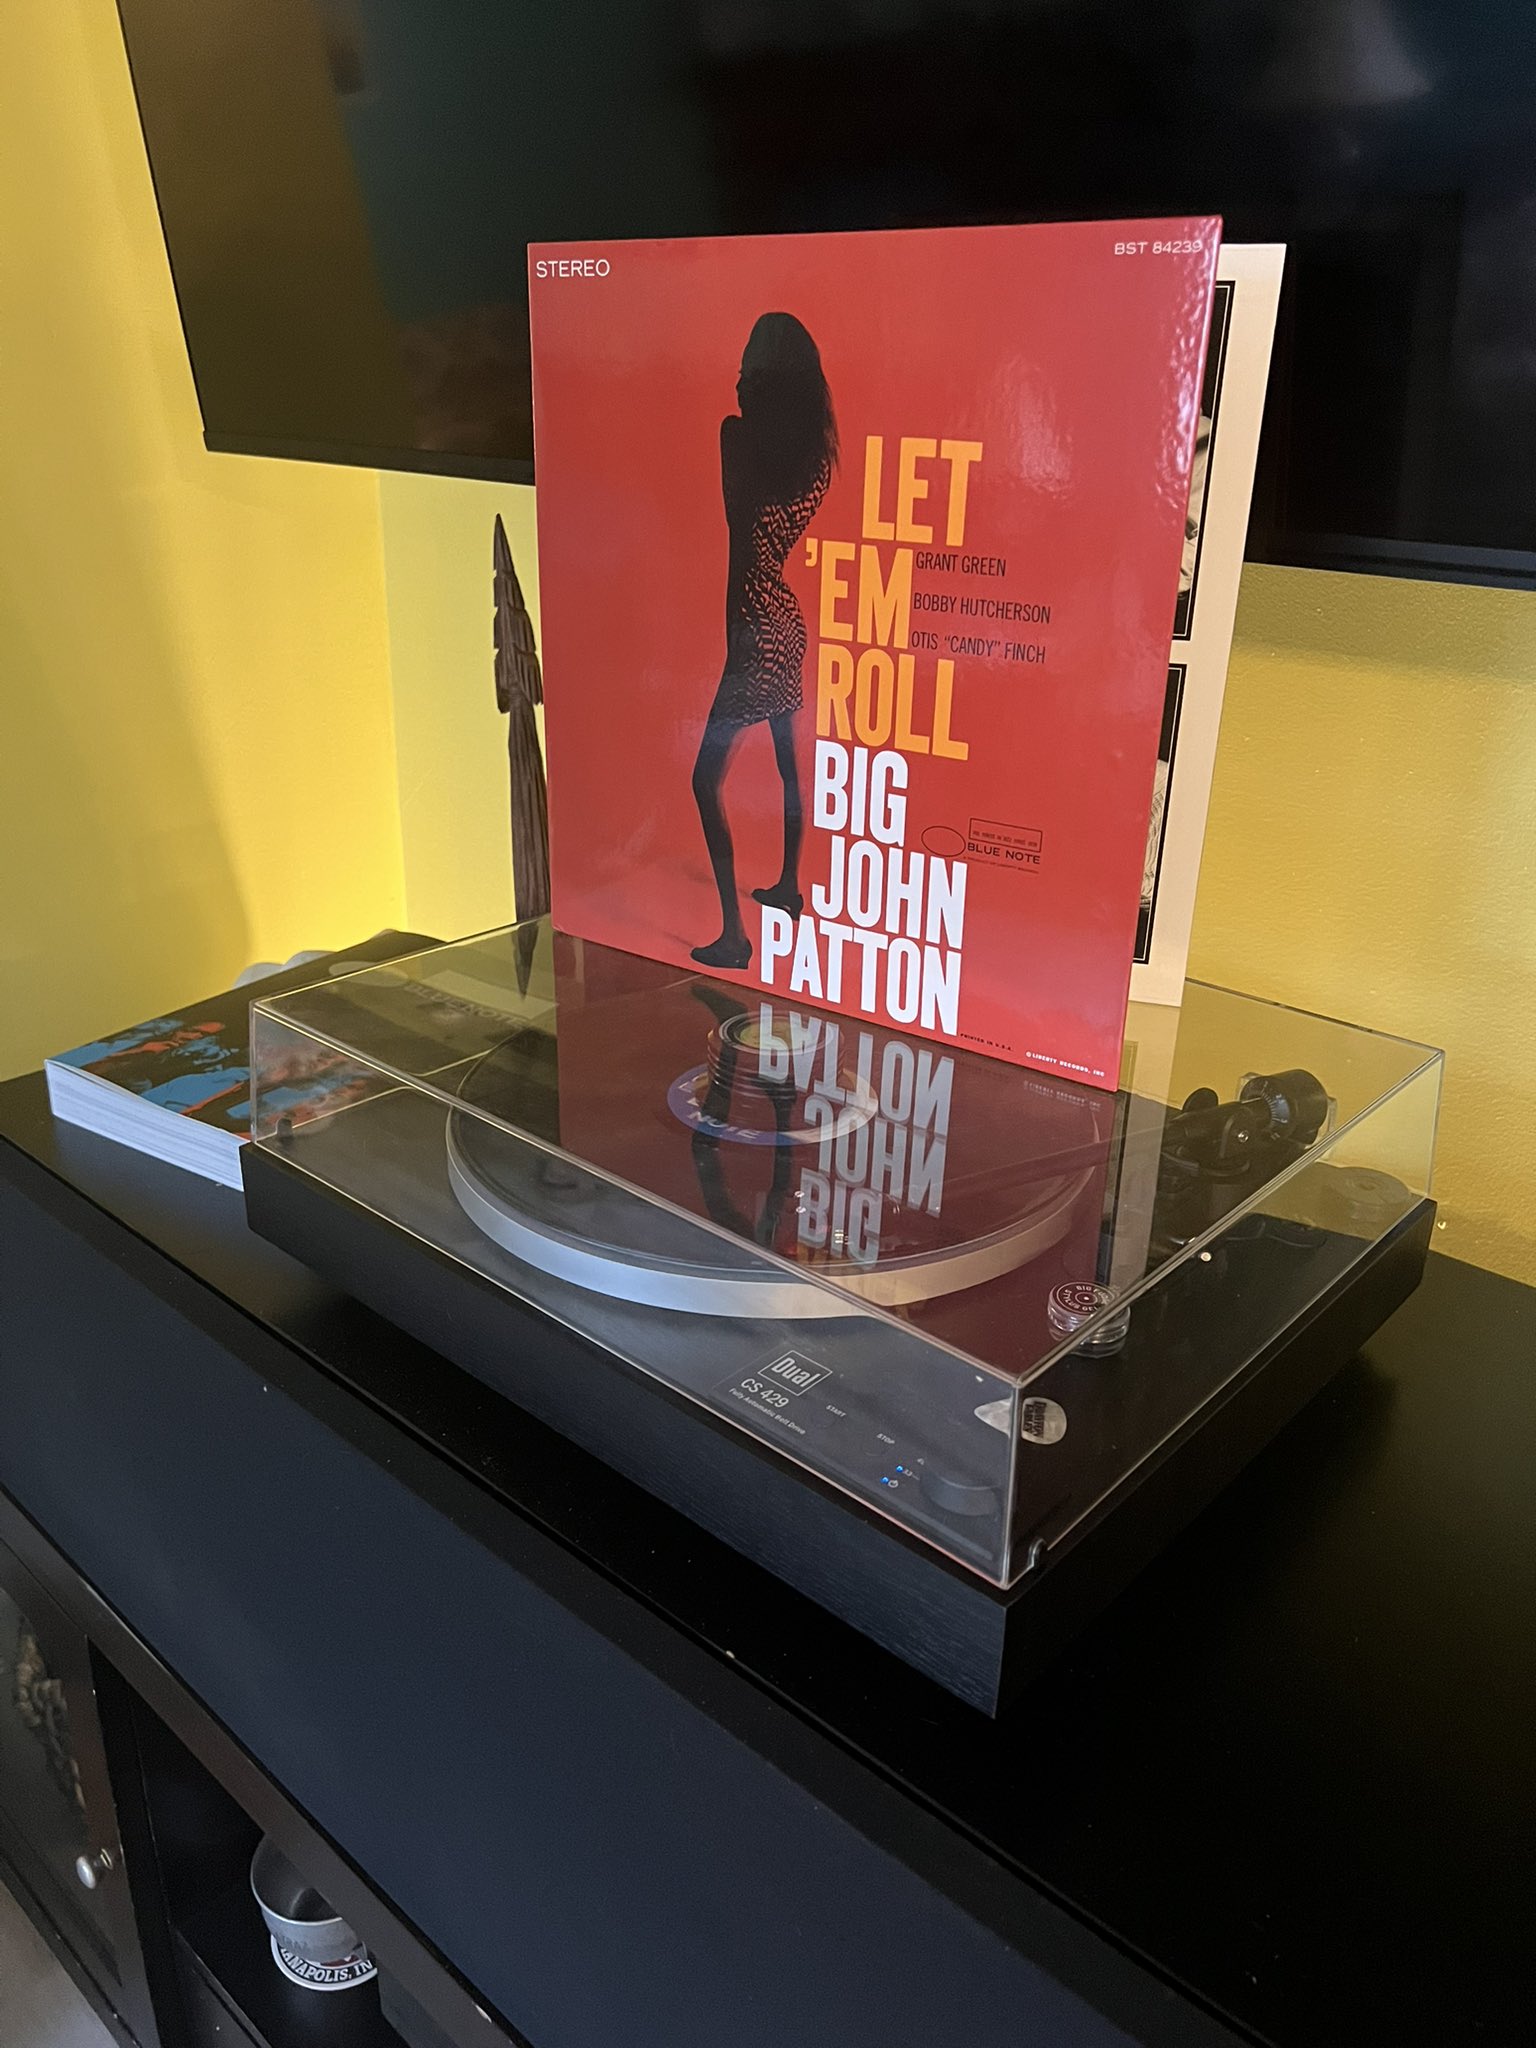 TheDoctor1973 on X: "Another fantastic Tone Poet reissue from  @bluenoterecords. Big John Patton's “Let 'Em Roll” (1966) with Grant Green  on guitar, Bobby Hutcherson on vibes & Otis “Candy” Finch on drums!